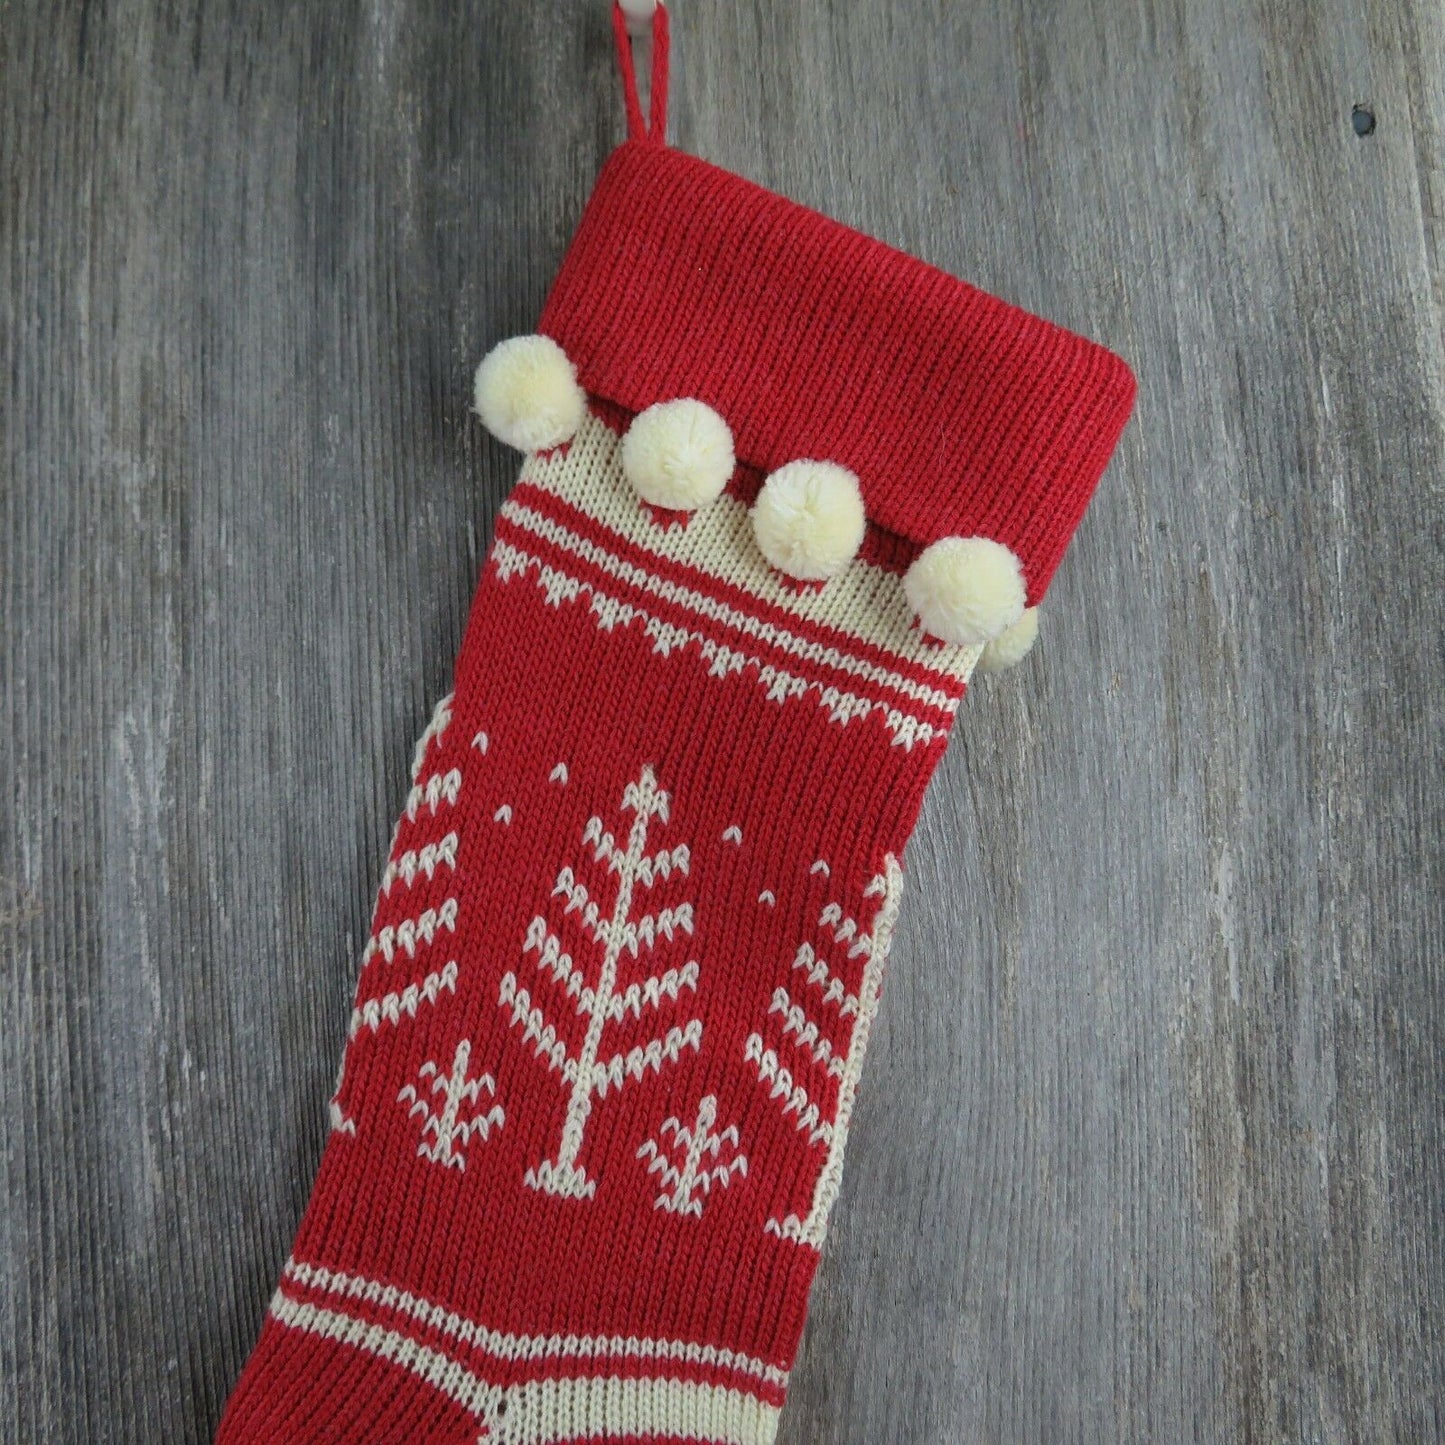 Vintage Christmas Stocking Knitted Knit Trees Large Red with White Pom Poms - At Grandma's Table